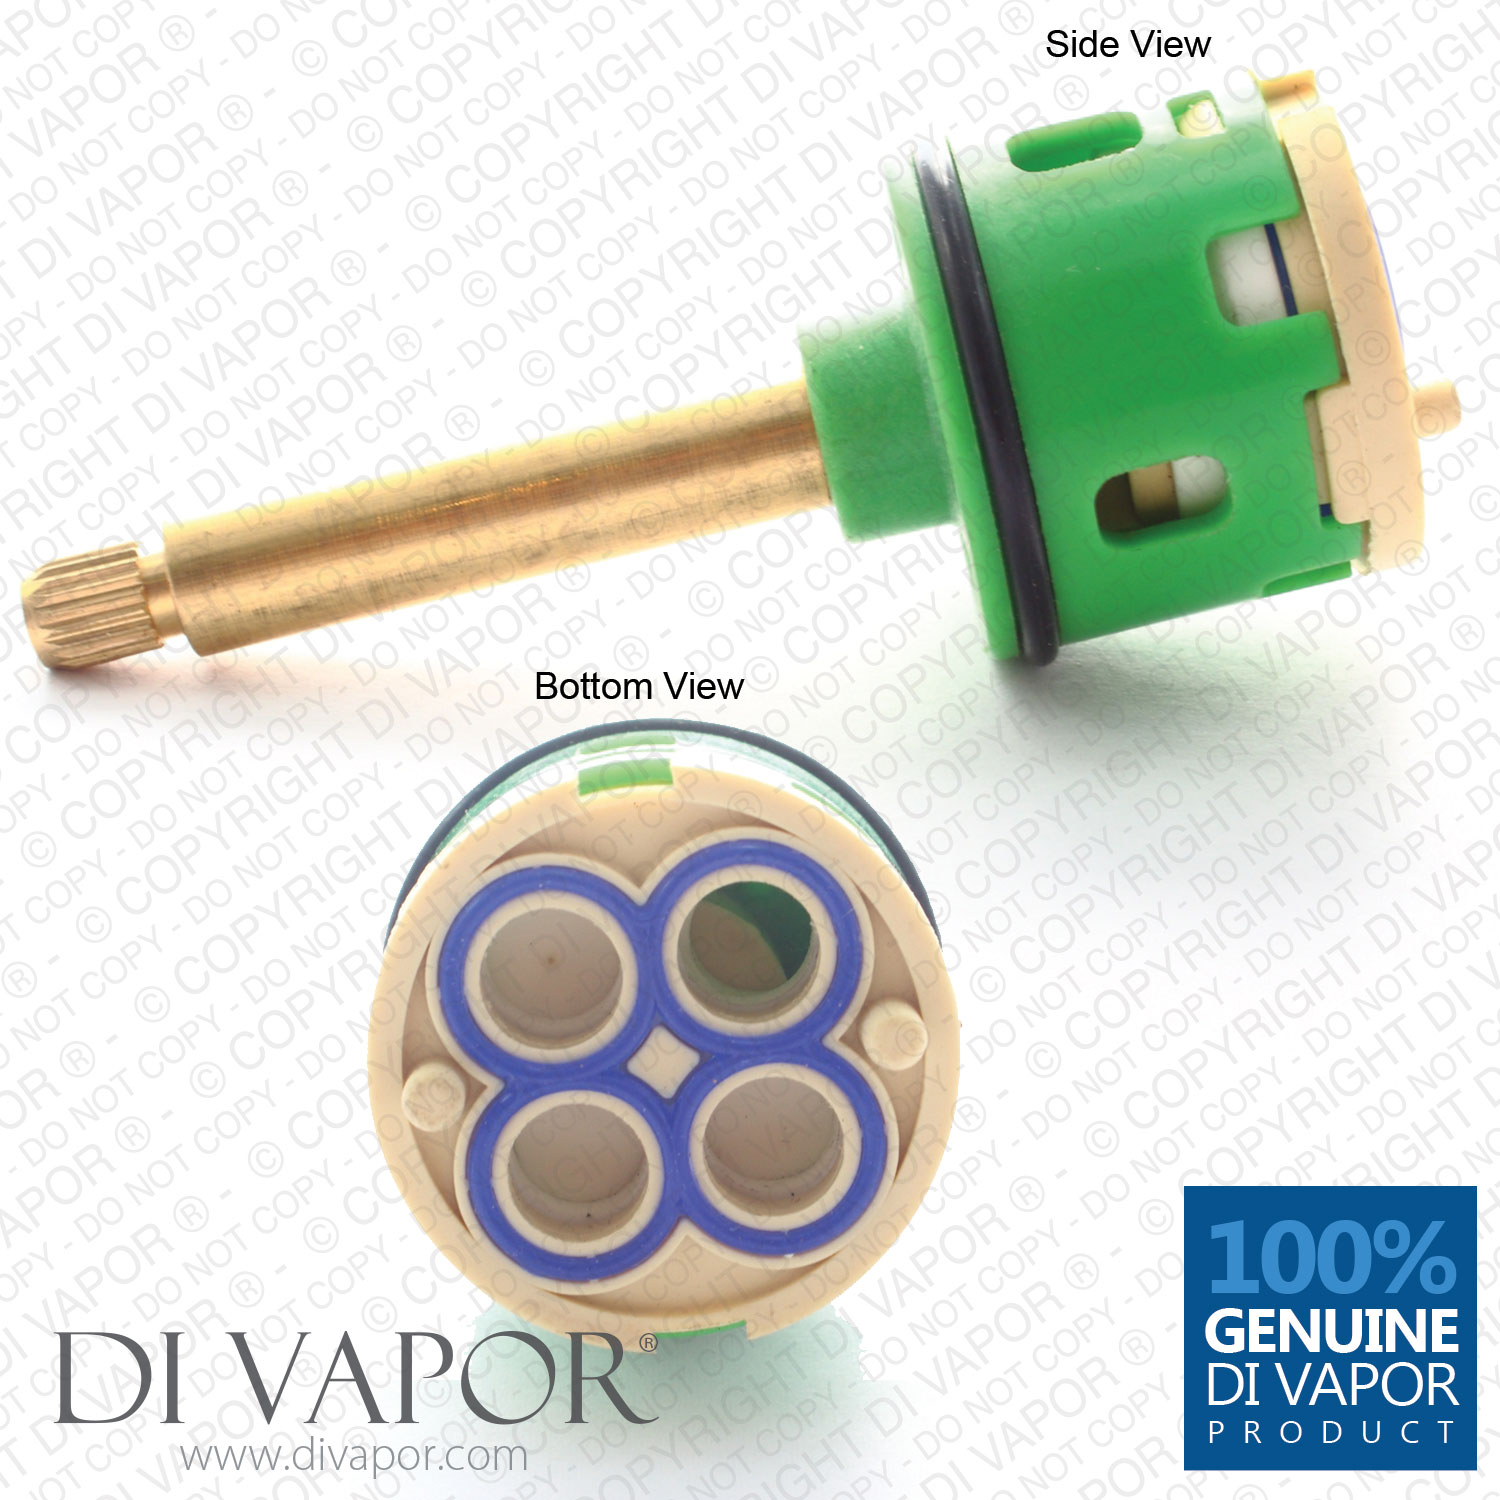 4 Way Shower Diverter Valve Cartridge - Tap Central Core - O Ring Push Fit